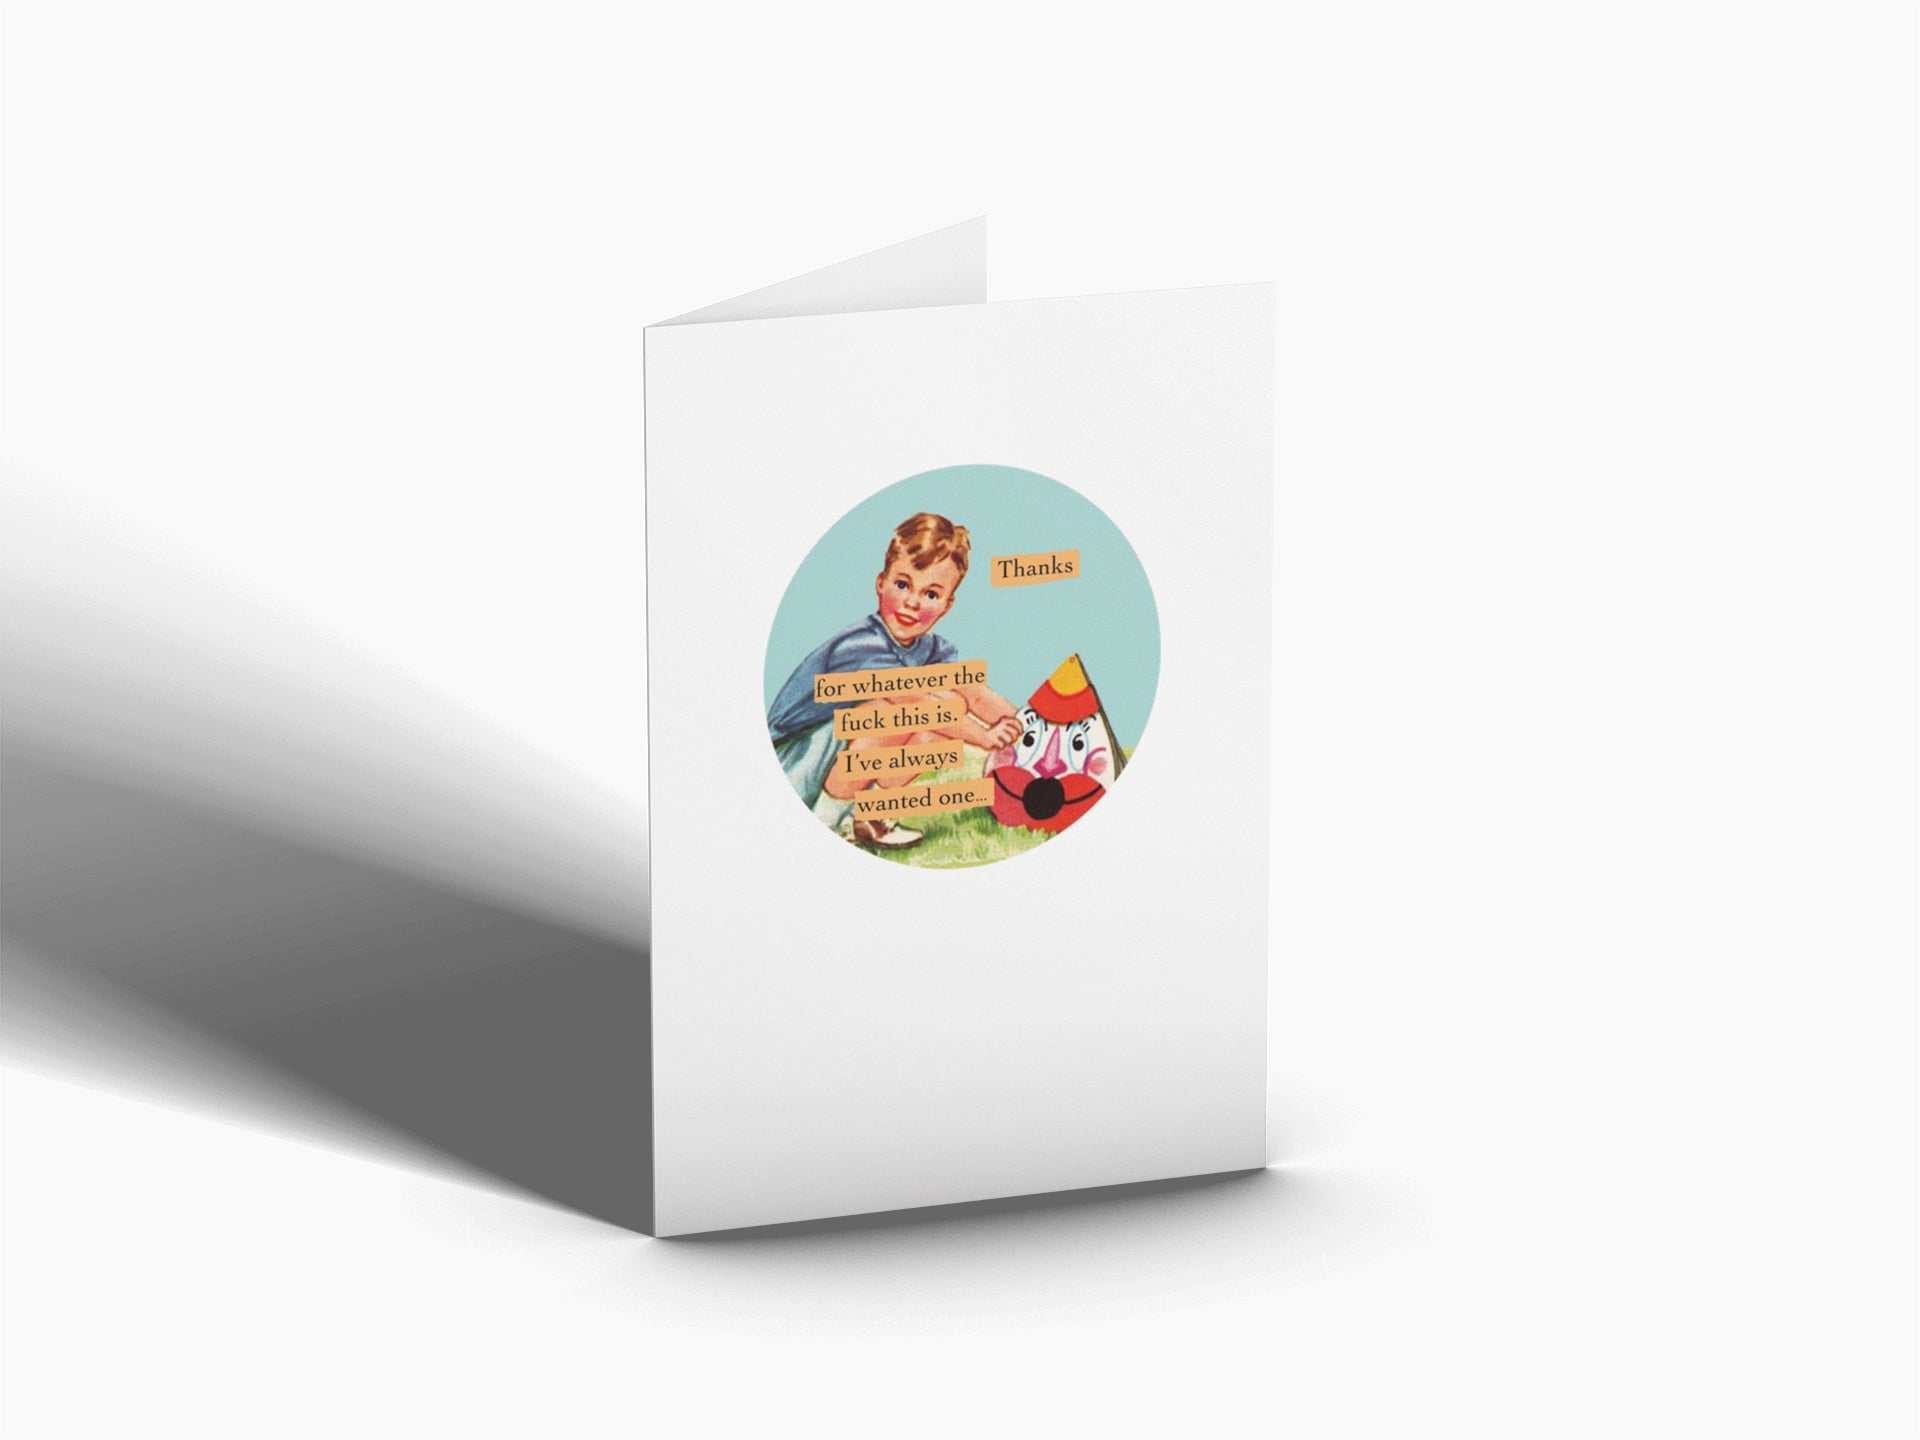 Thanks - Greeting Card - Dodgy Greetings - the candle tailor